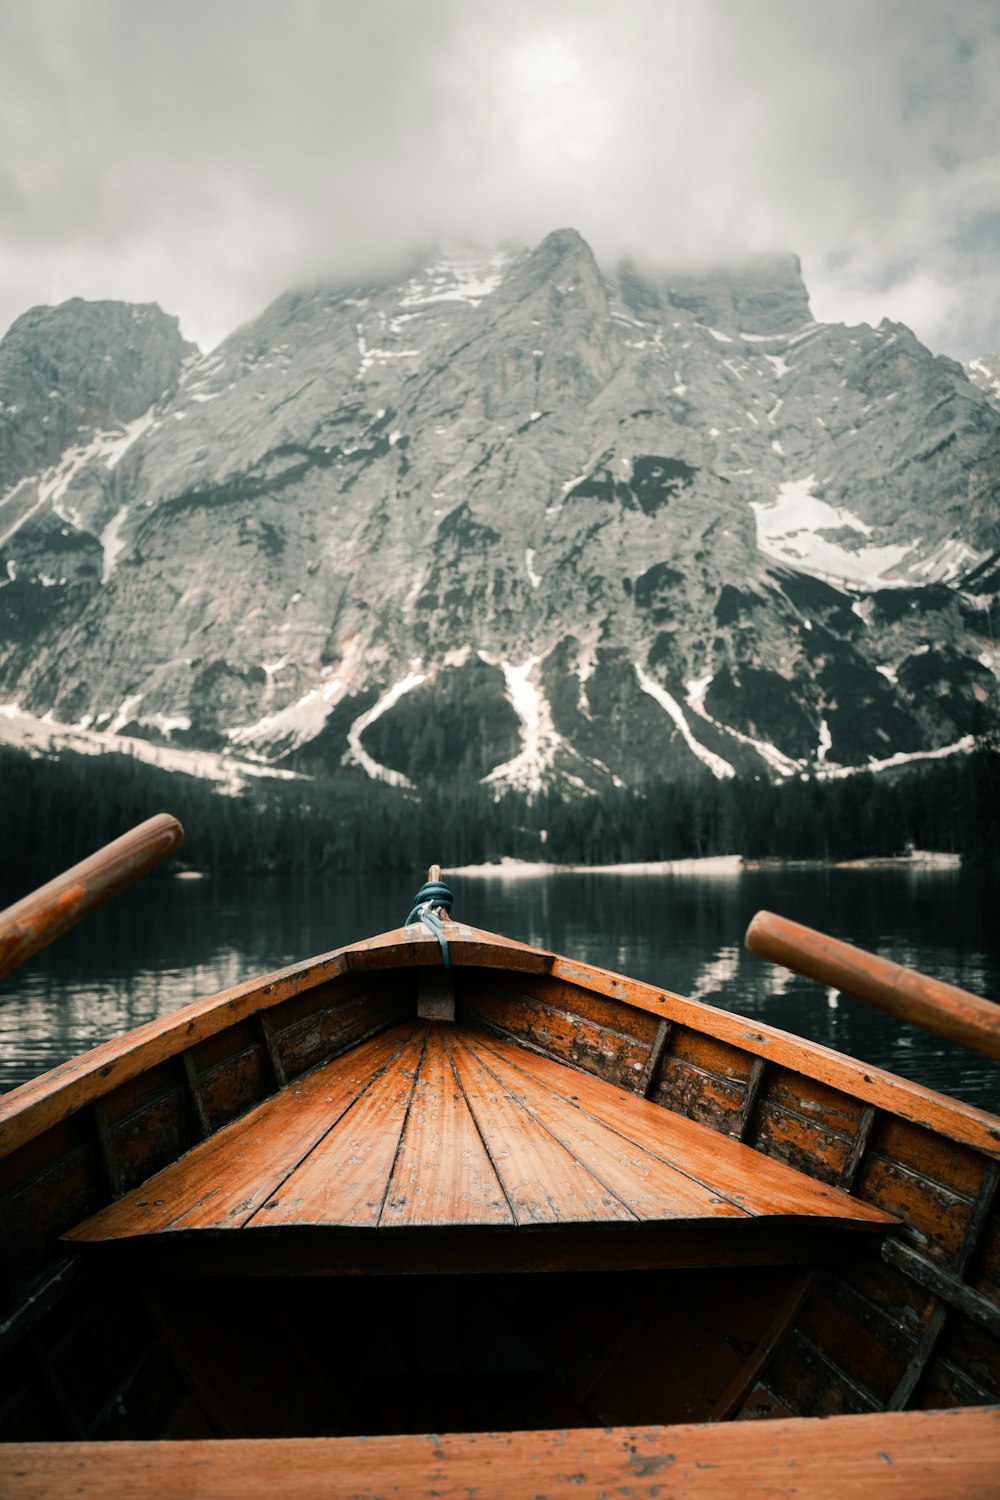 a boat on a body of water with a mountain in the background